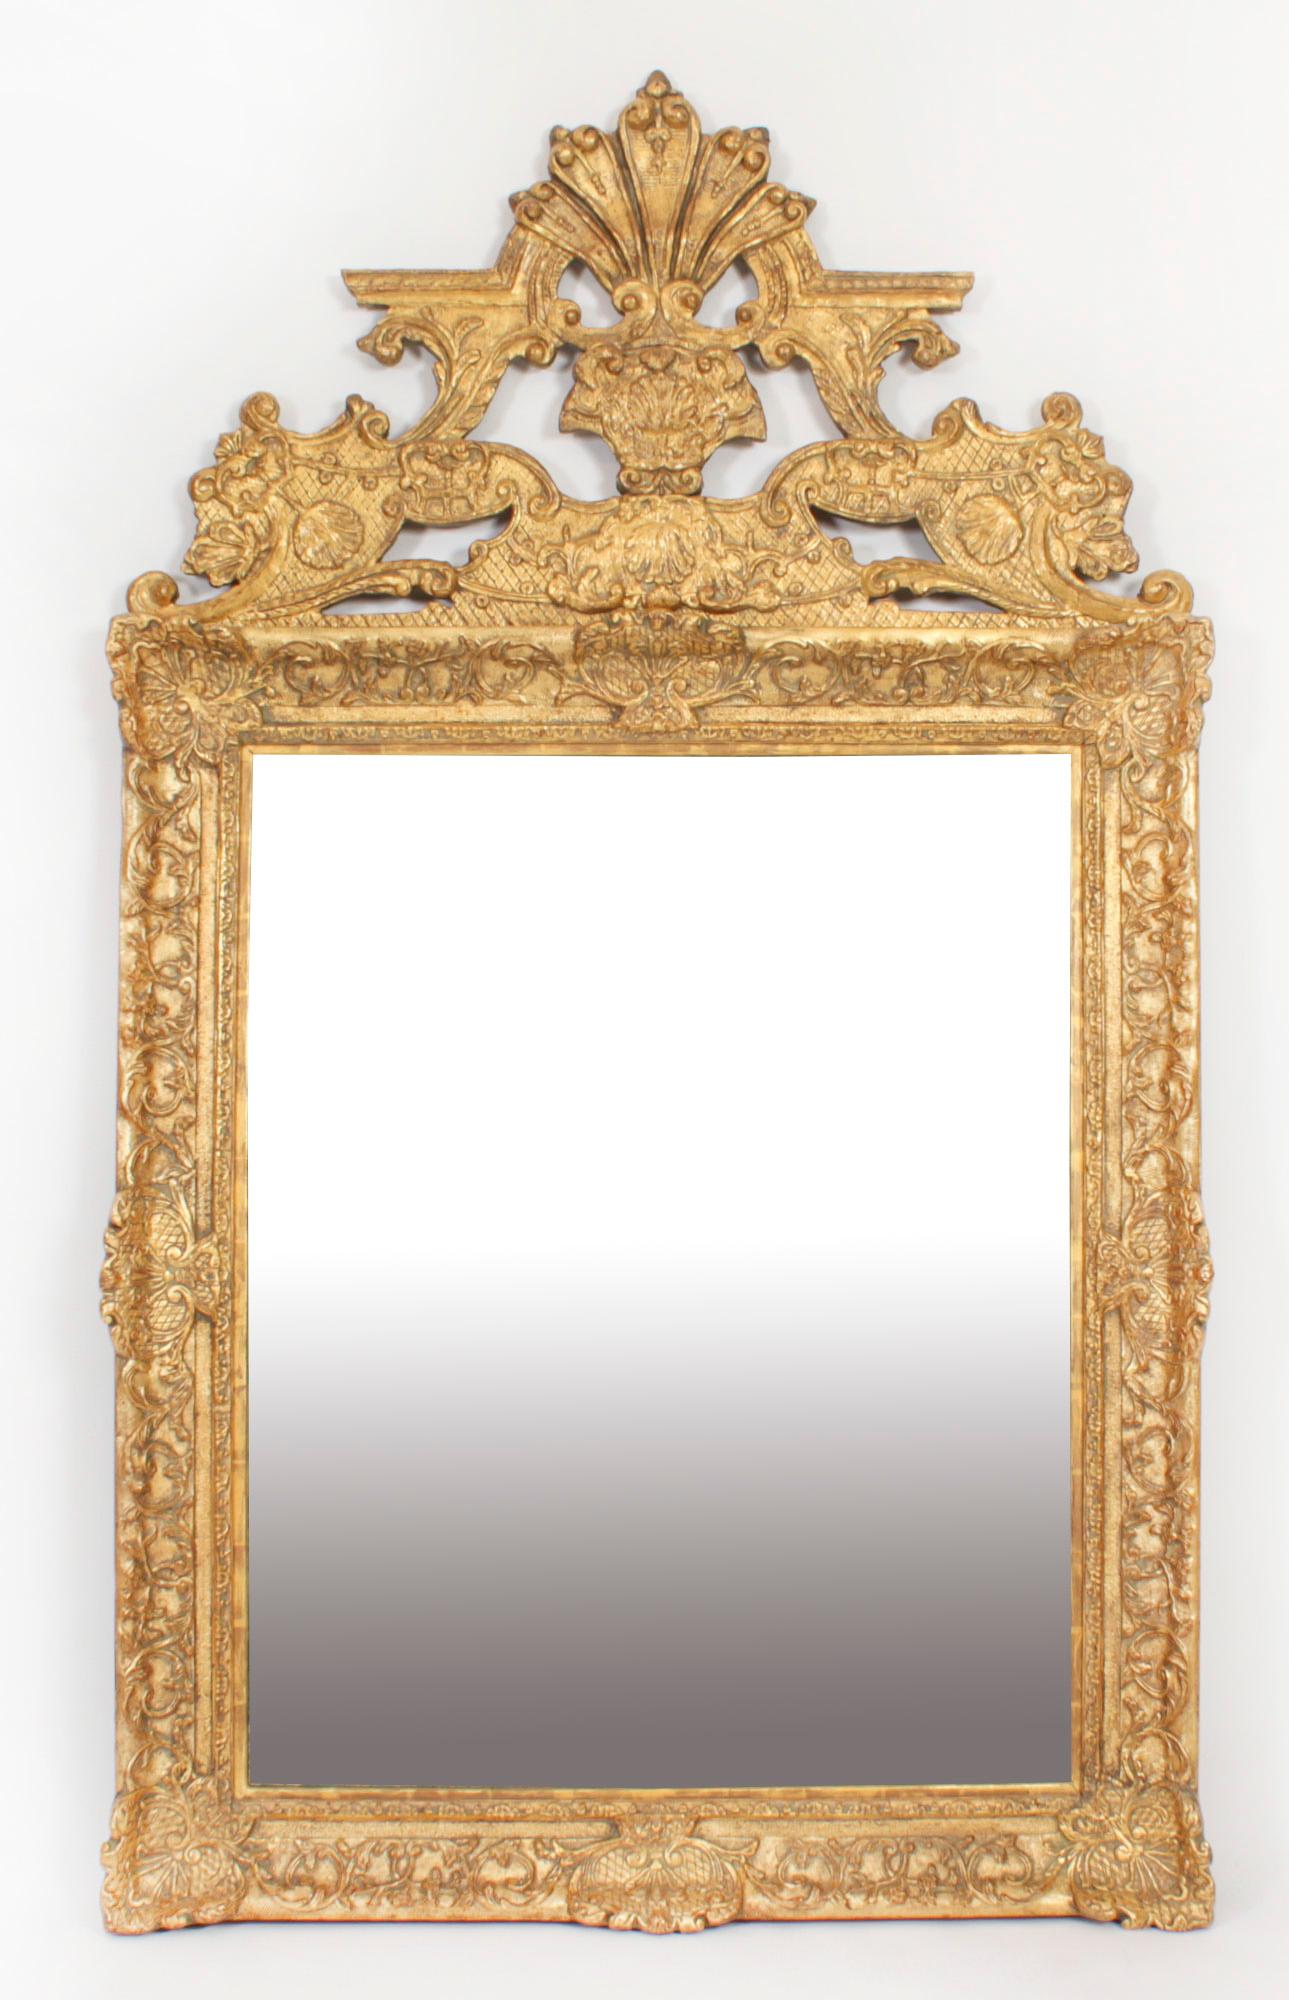 Antique Large French Giltwood Wall Mirror 18th Century - 171x101cm For Sale 10